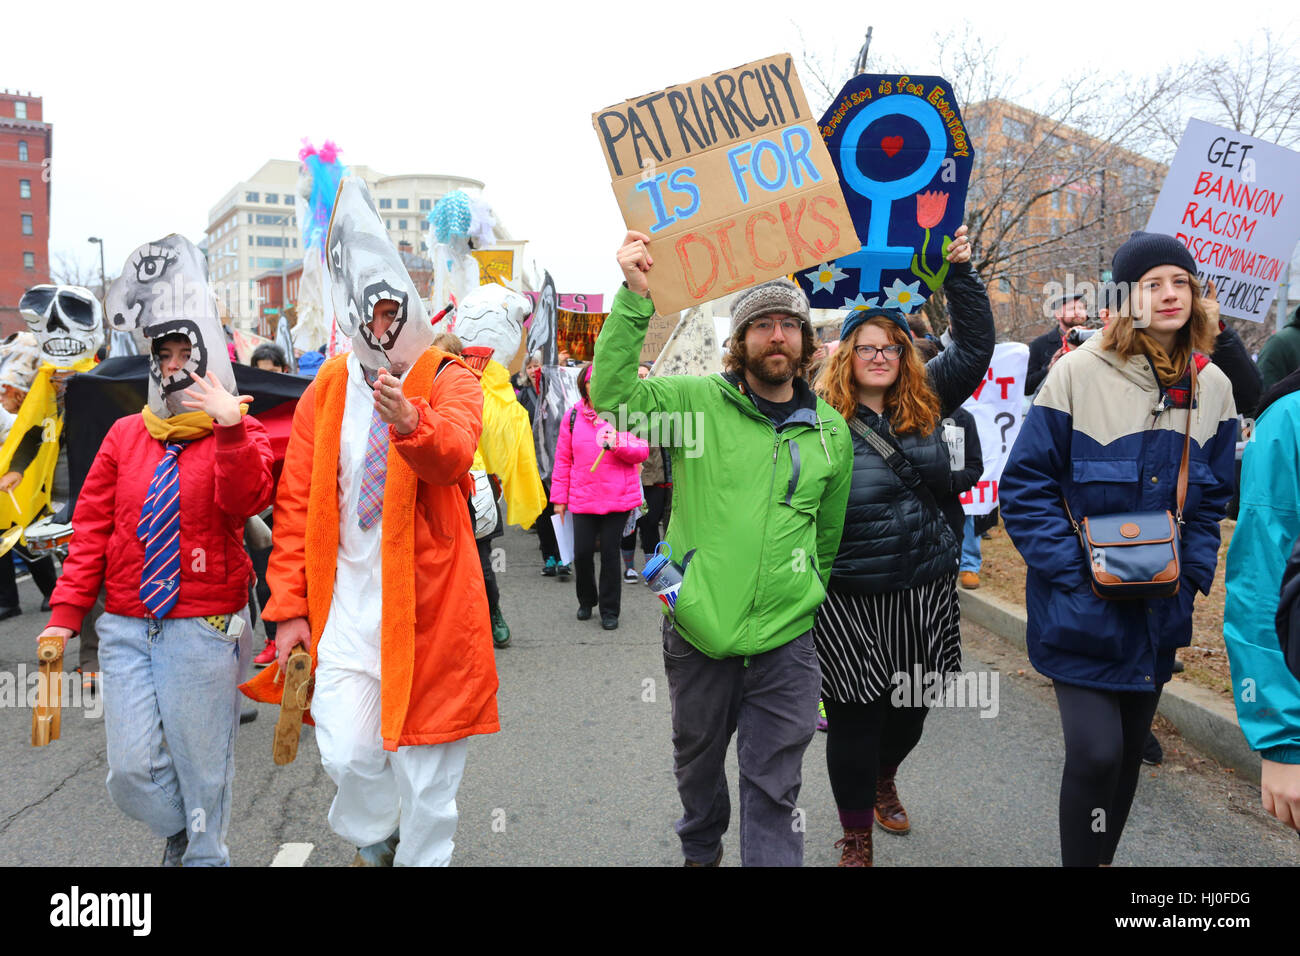 Washington, DC, USA. 20th January, 2017. Demonstrations on inauguration day.  Costumed performers, and people in the 'Festival of Resistance' march. The people hold a sign saying, 'Patriarchy is for Dicks', 'Feminism is for Everybody'. January 20, 2017. Stock Photo